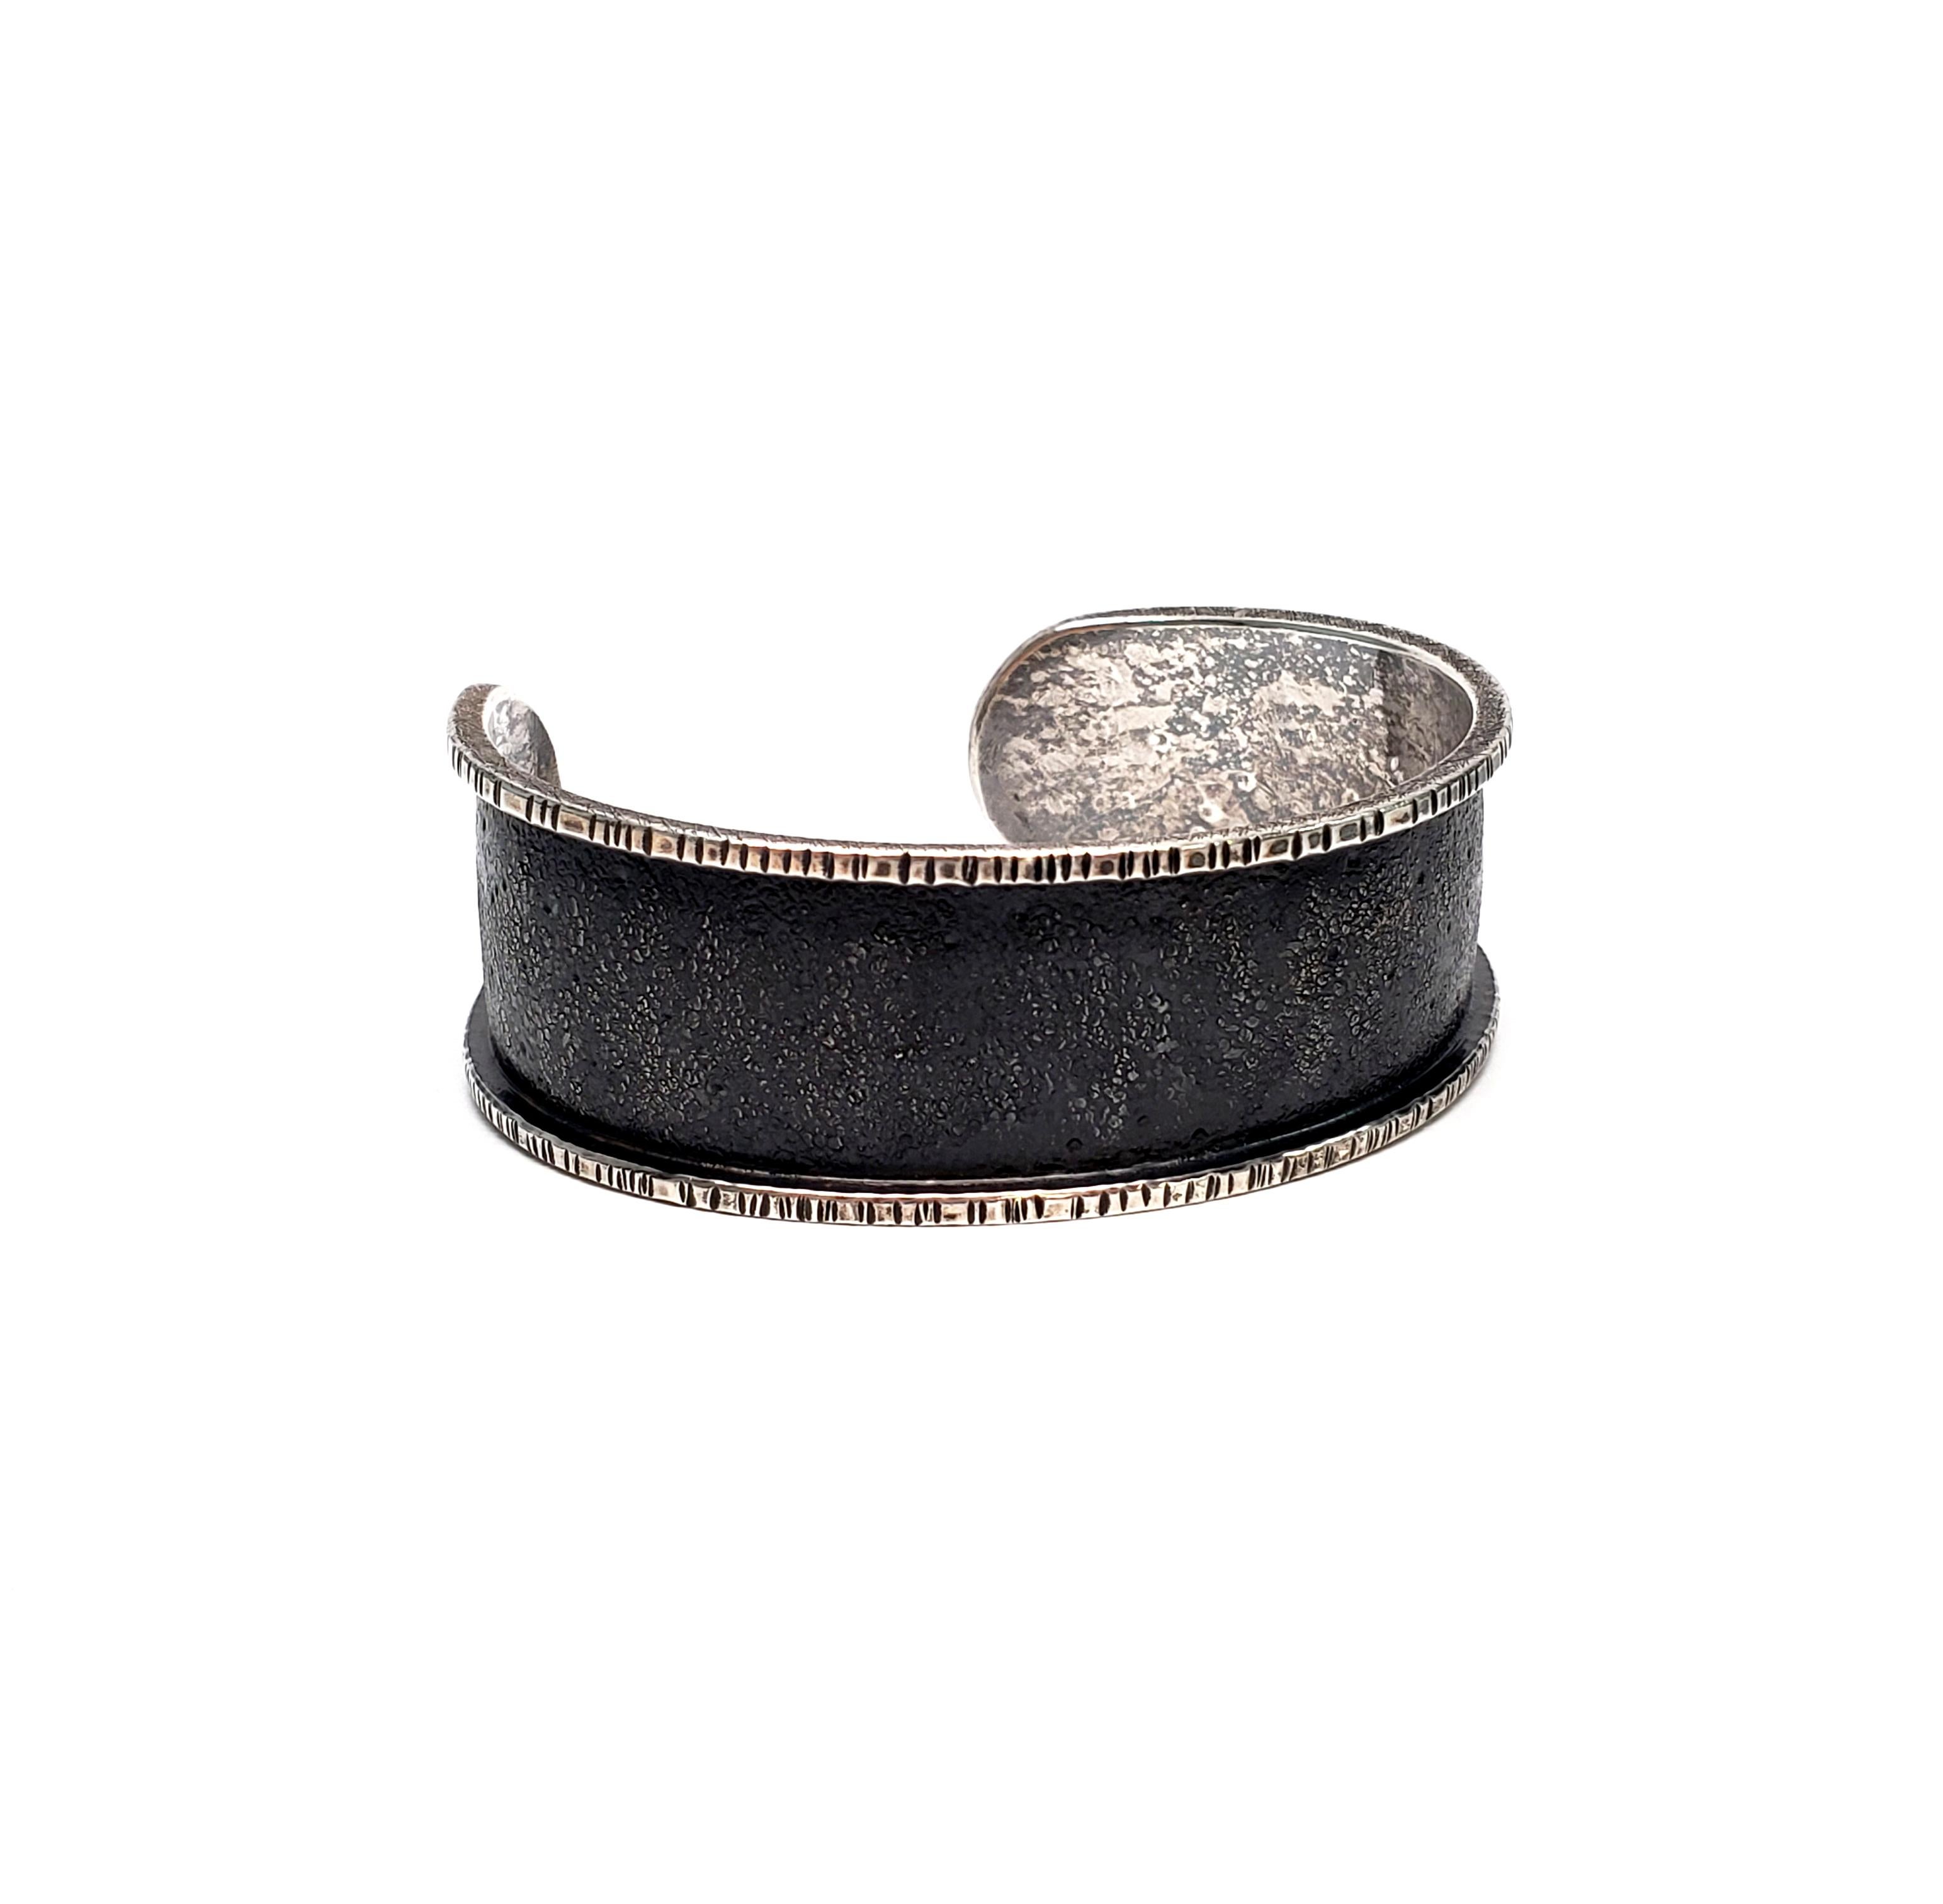 Davide Bigazzi oxidized sterling silver chased cuff bracelet.

Beautiful and unique piece handcrafted by Bigazzi, who is renowned for his mastery of chasing and repousse.

Bracelet measures 7/8